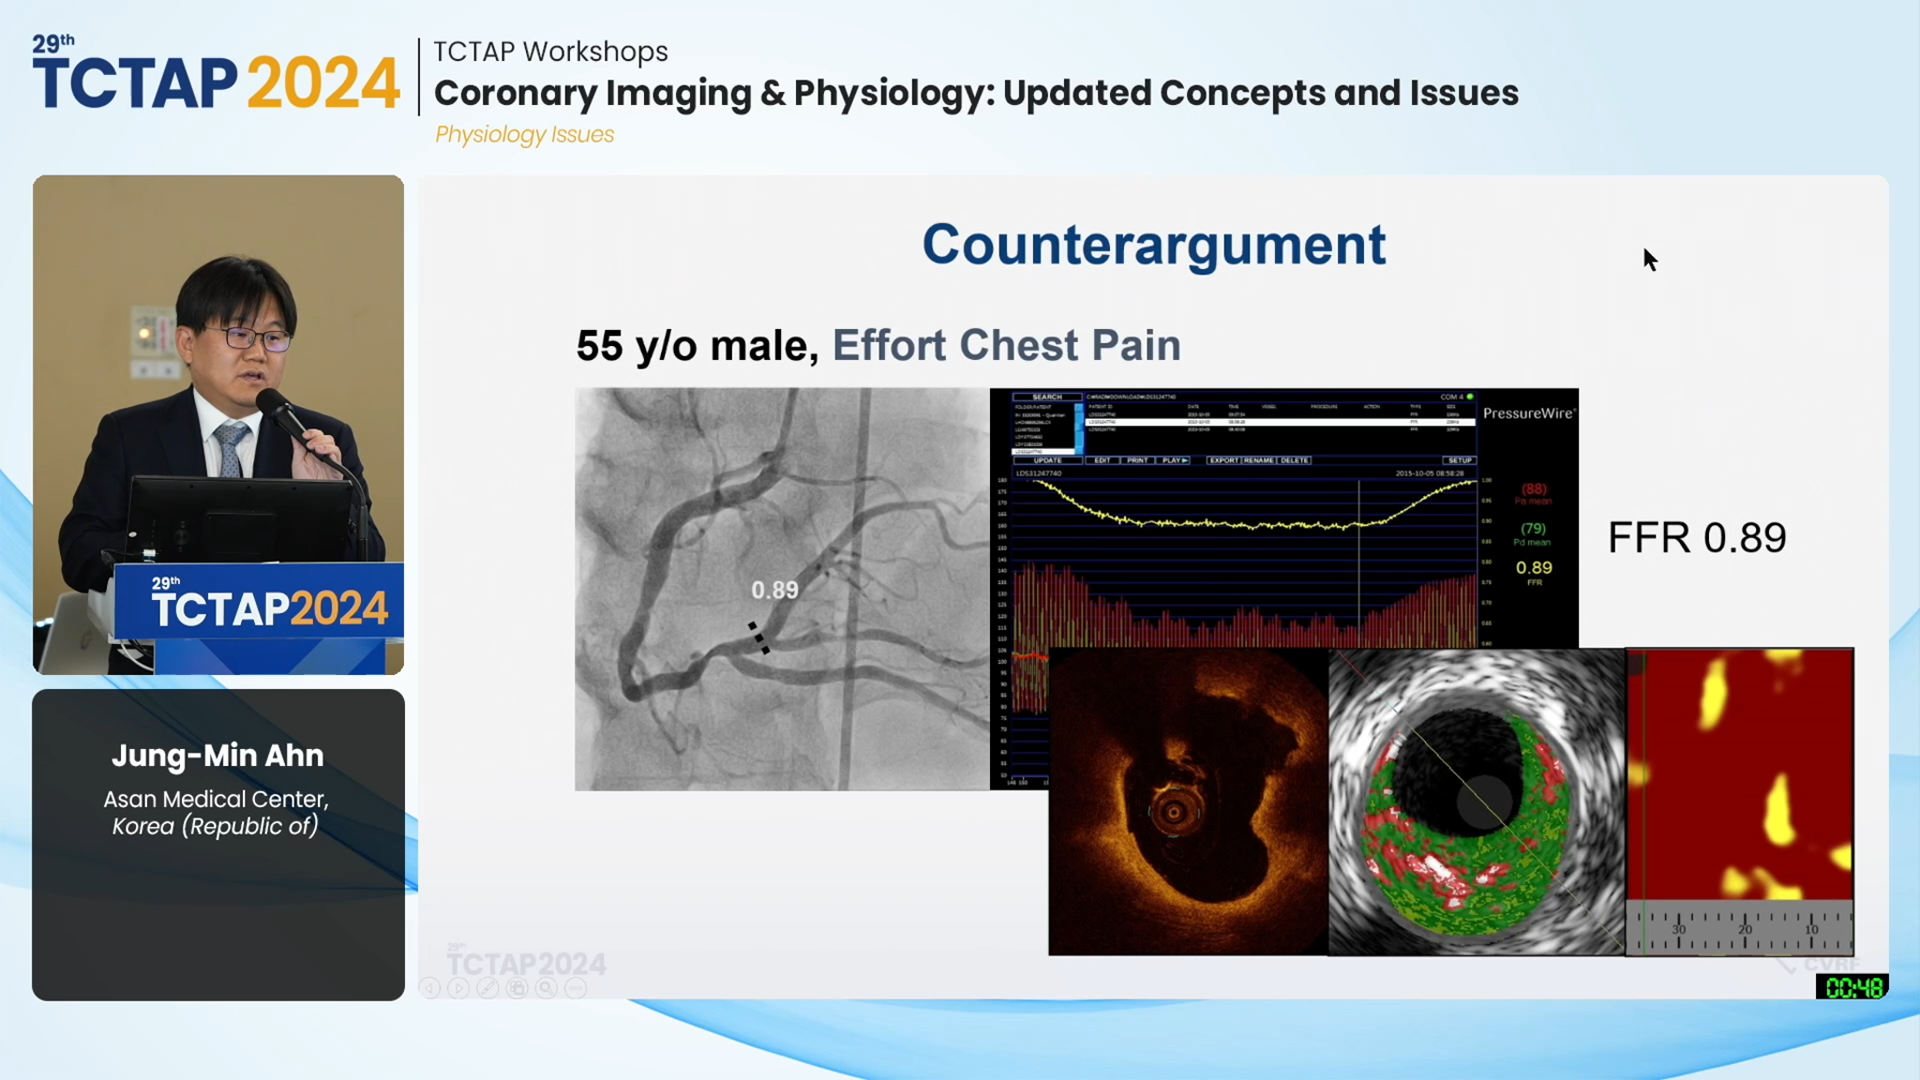 [TCTAP Workshops] Coronary Imaging & Physiology: Updated Concepts and Issues